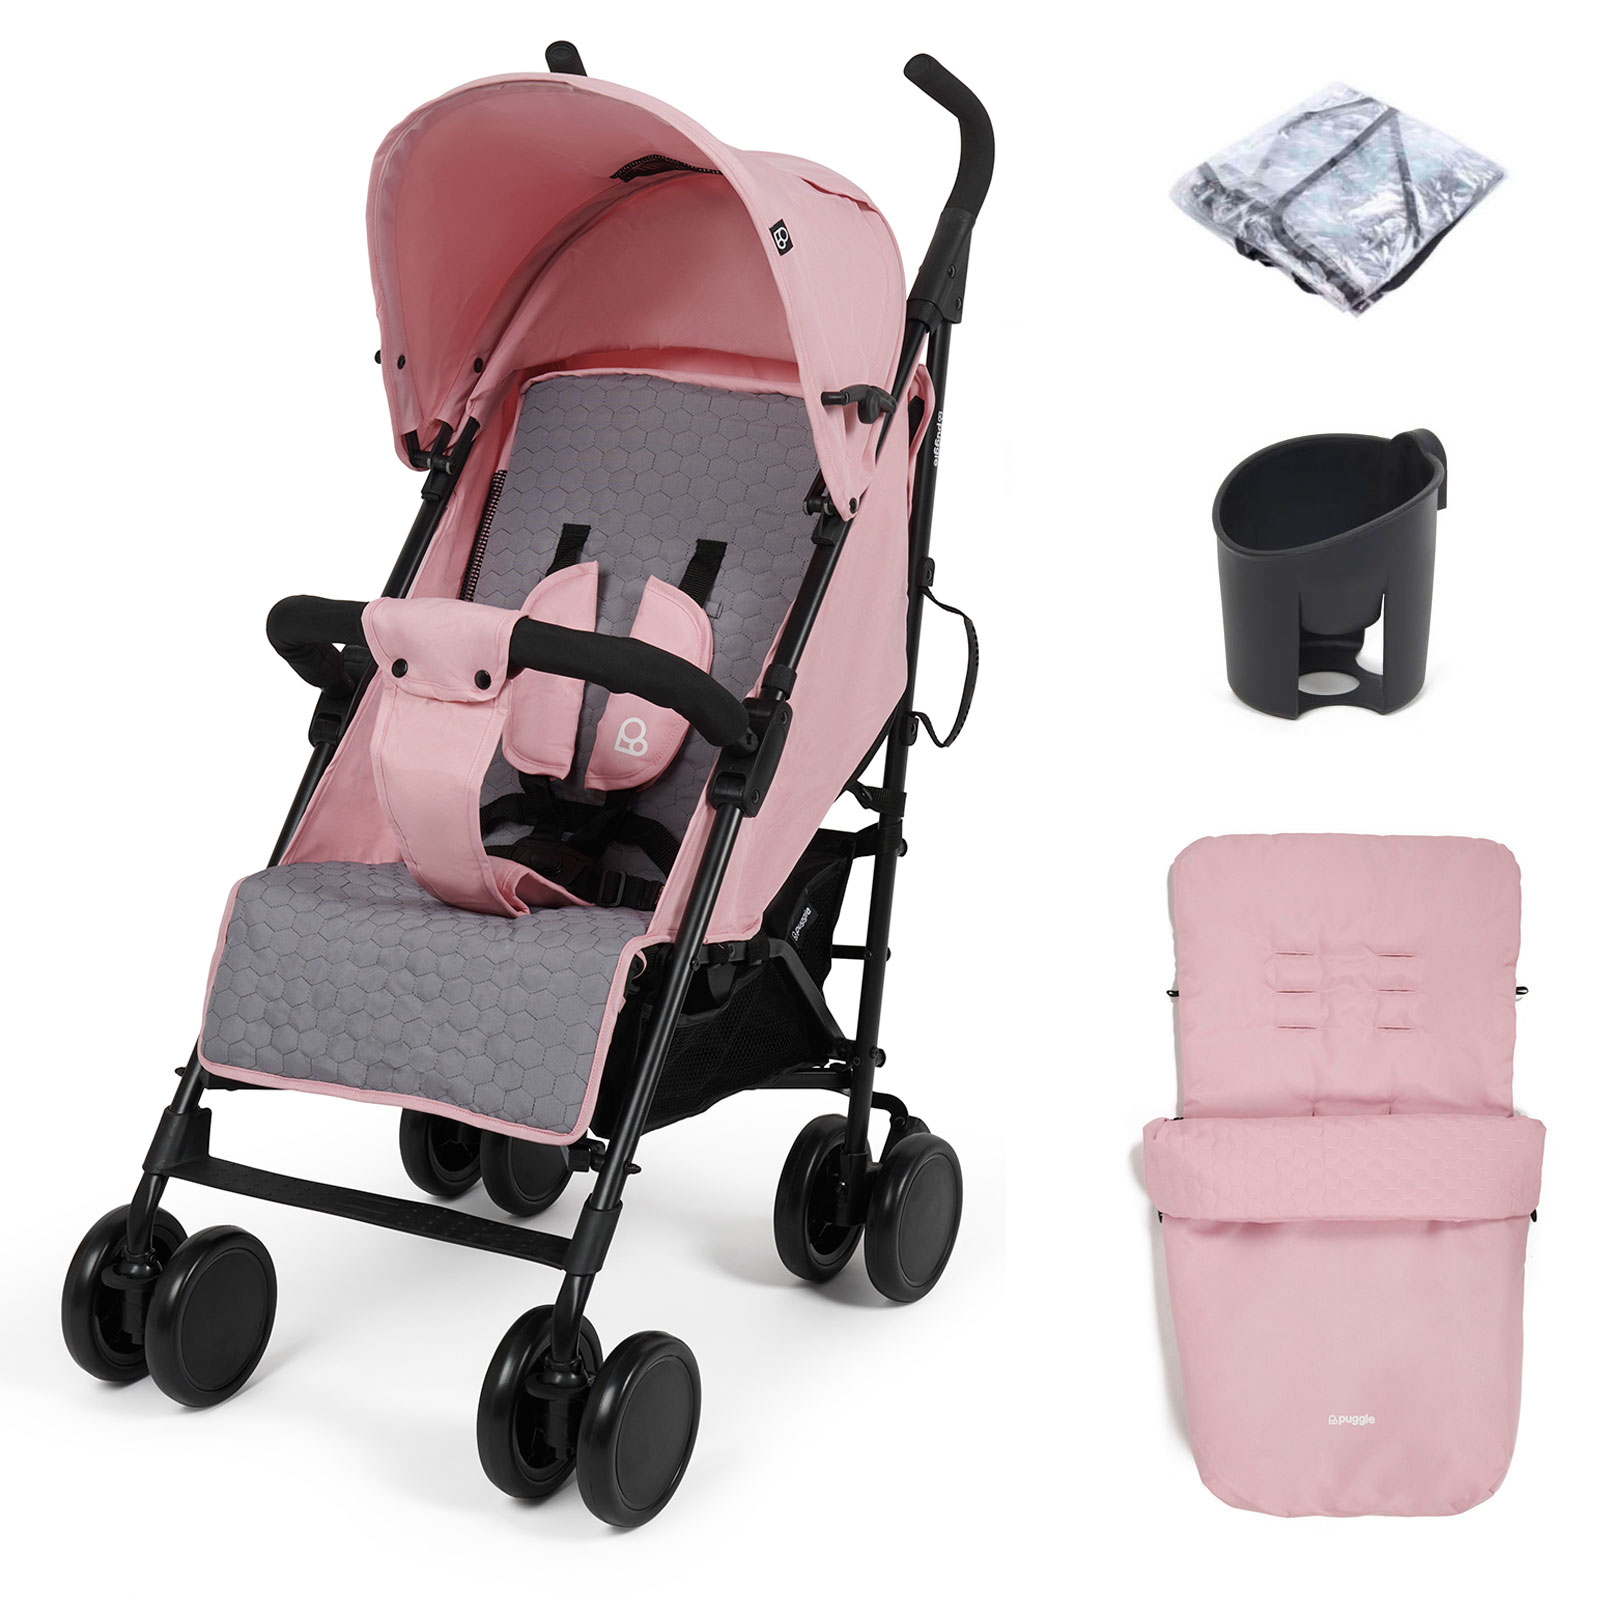 Puggle Litemax Pushchair Stroller with Raincover, Cupholder and Universal Footmuff - Vintage Pink